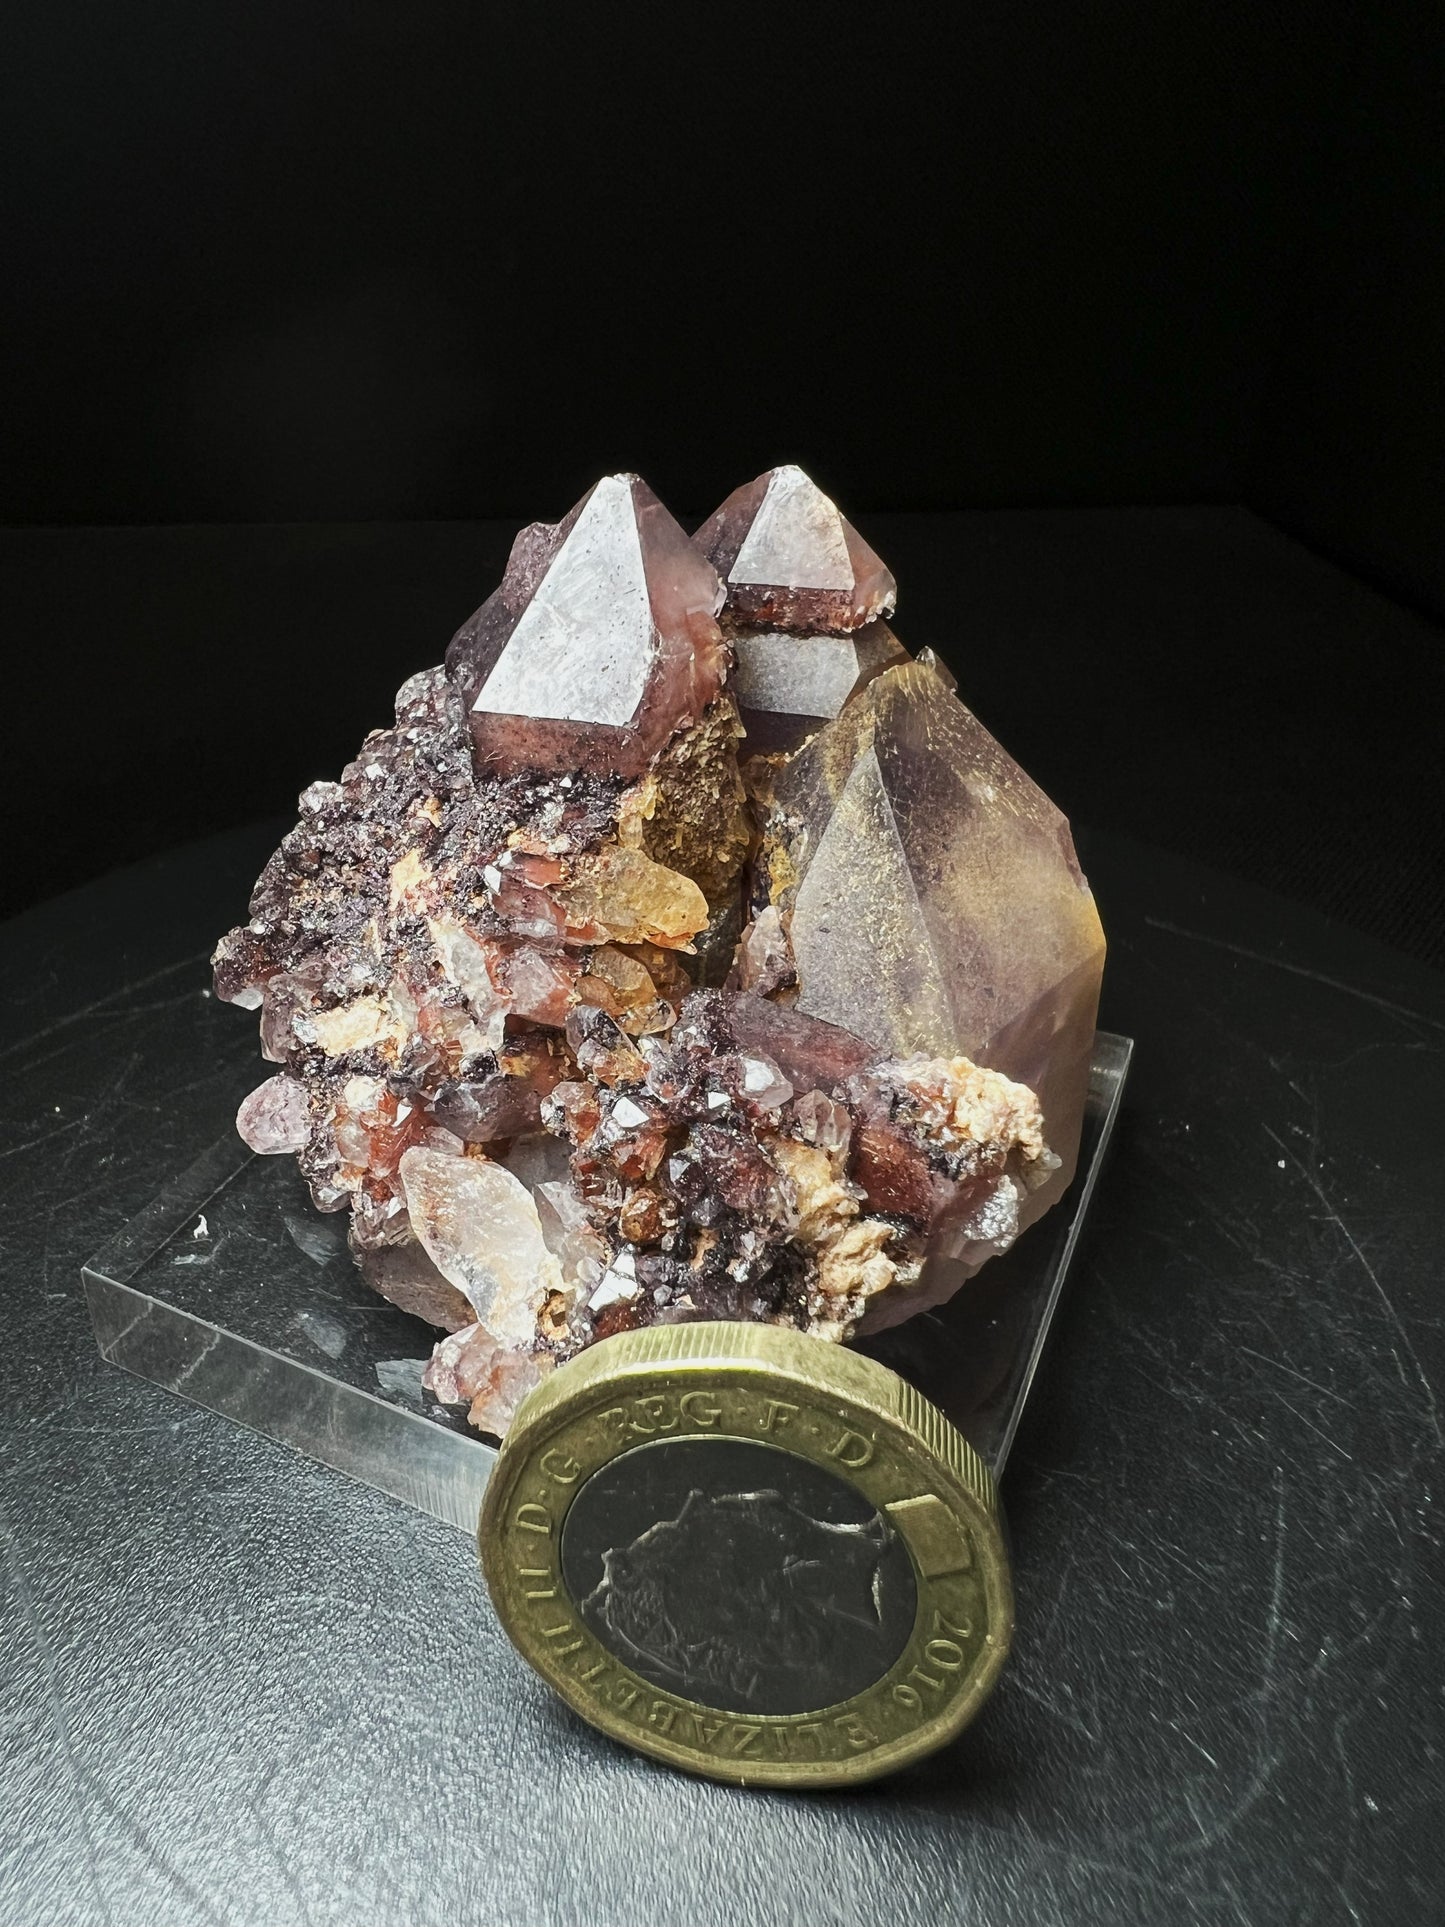 Amethyst with Hematite From Orange River, Northern Cape, South Africa- collectors piece